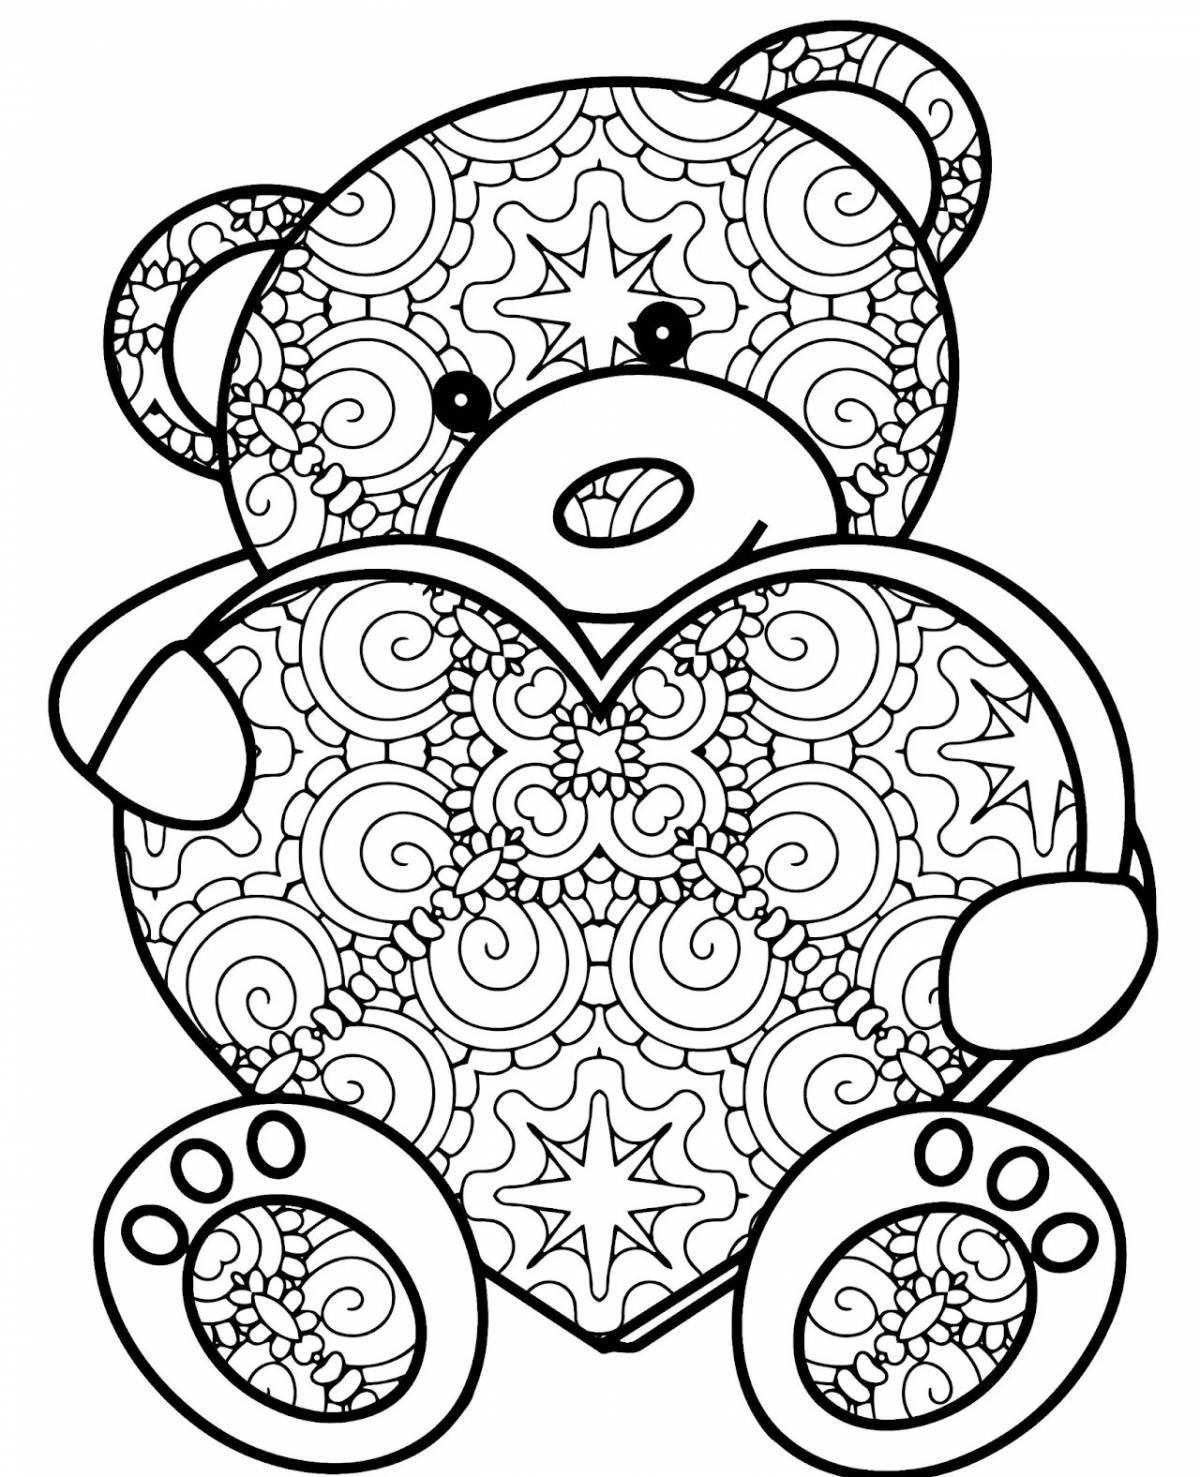 Exciting large anti-stress coloring book